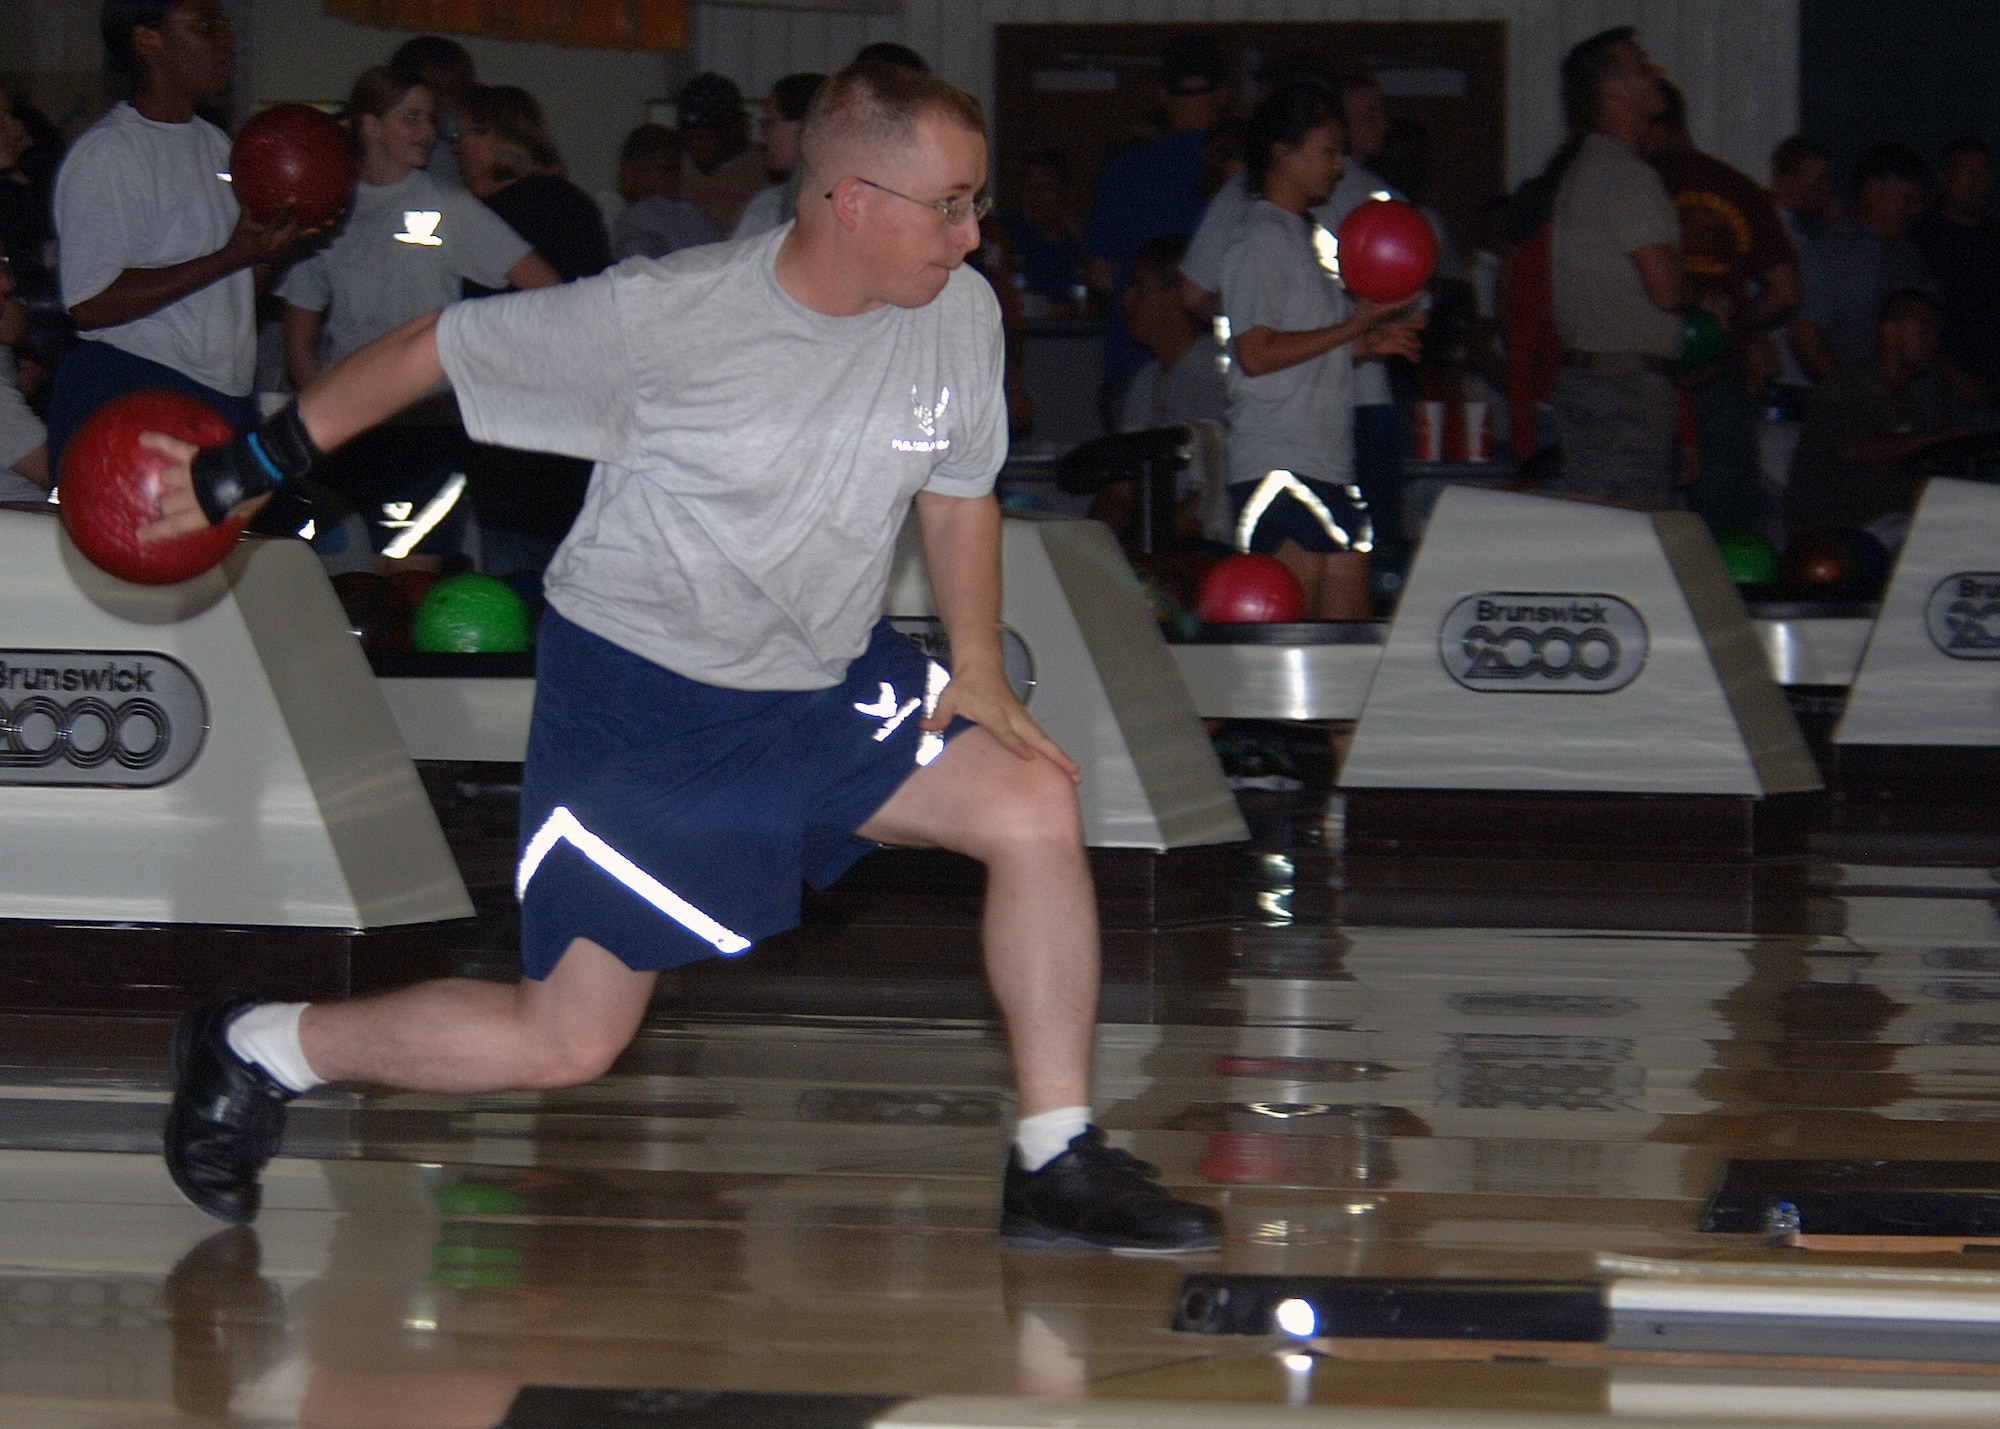 Senior Airman Jason Davis, 49th Contracting Squadron, competes in nine-pin no-tap bowling on Sports Day at  Holloman Air Force Base, N.M., October 10. Airmen from all squadrons come out to participate in many of Hollomans 15 different events. (U.S. Air Force photo/Airman 1st Class Michael Means)